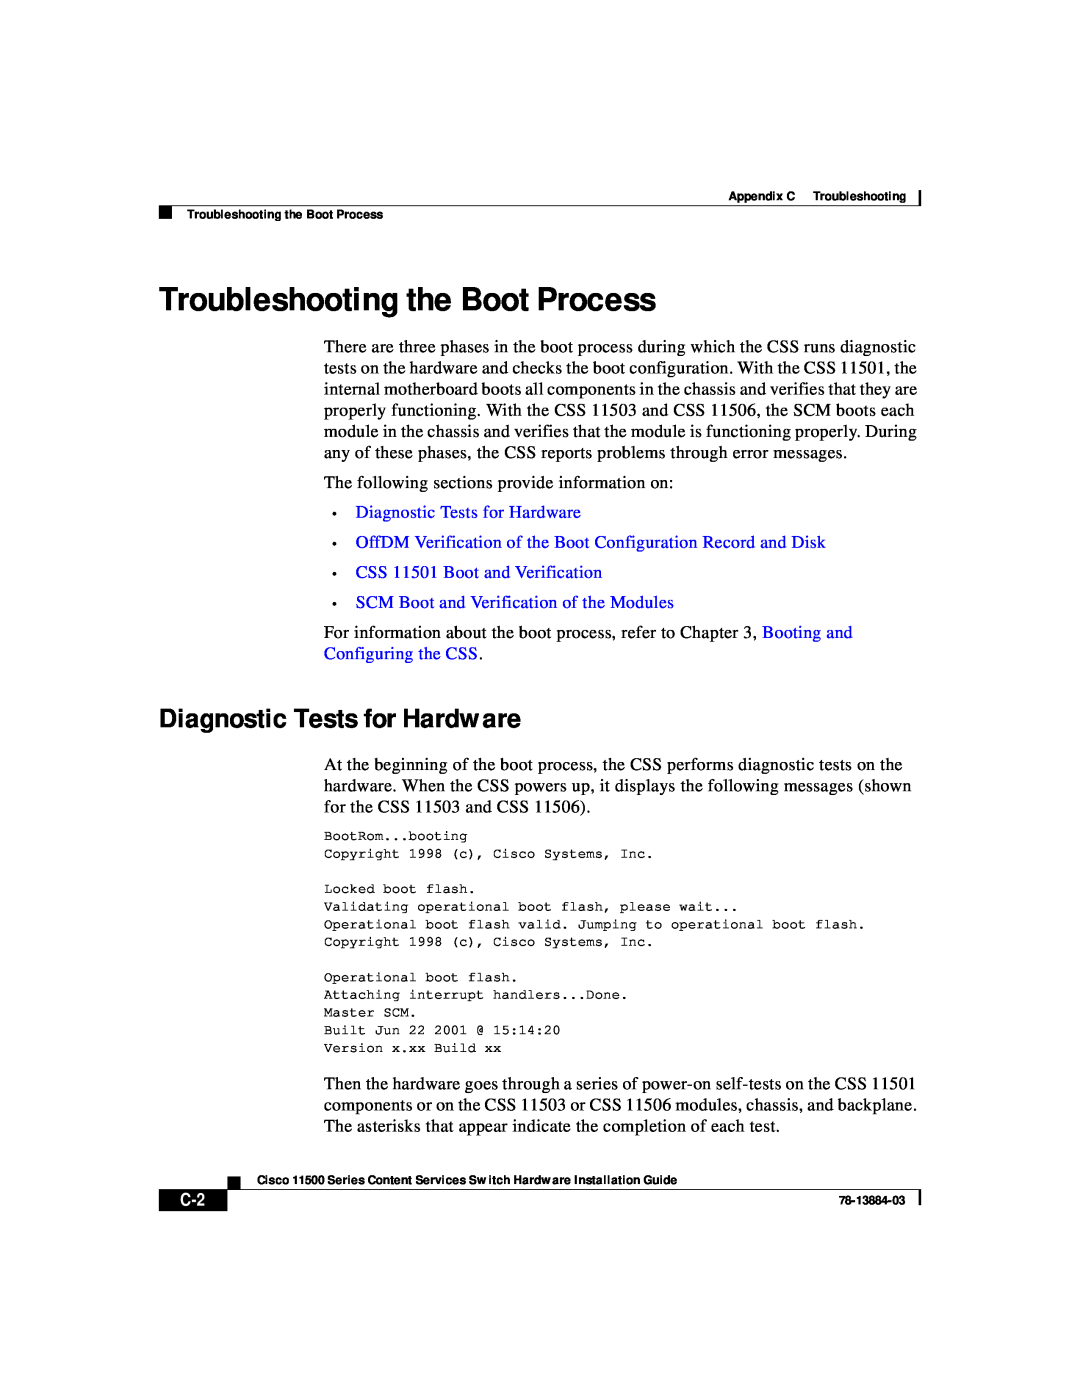 Cisco Systems 11500 Series manual Troubleshooting the Boot Process, Diagnostic Tests for Hardware, Configuring the CSS 